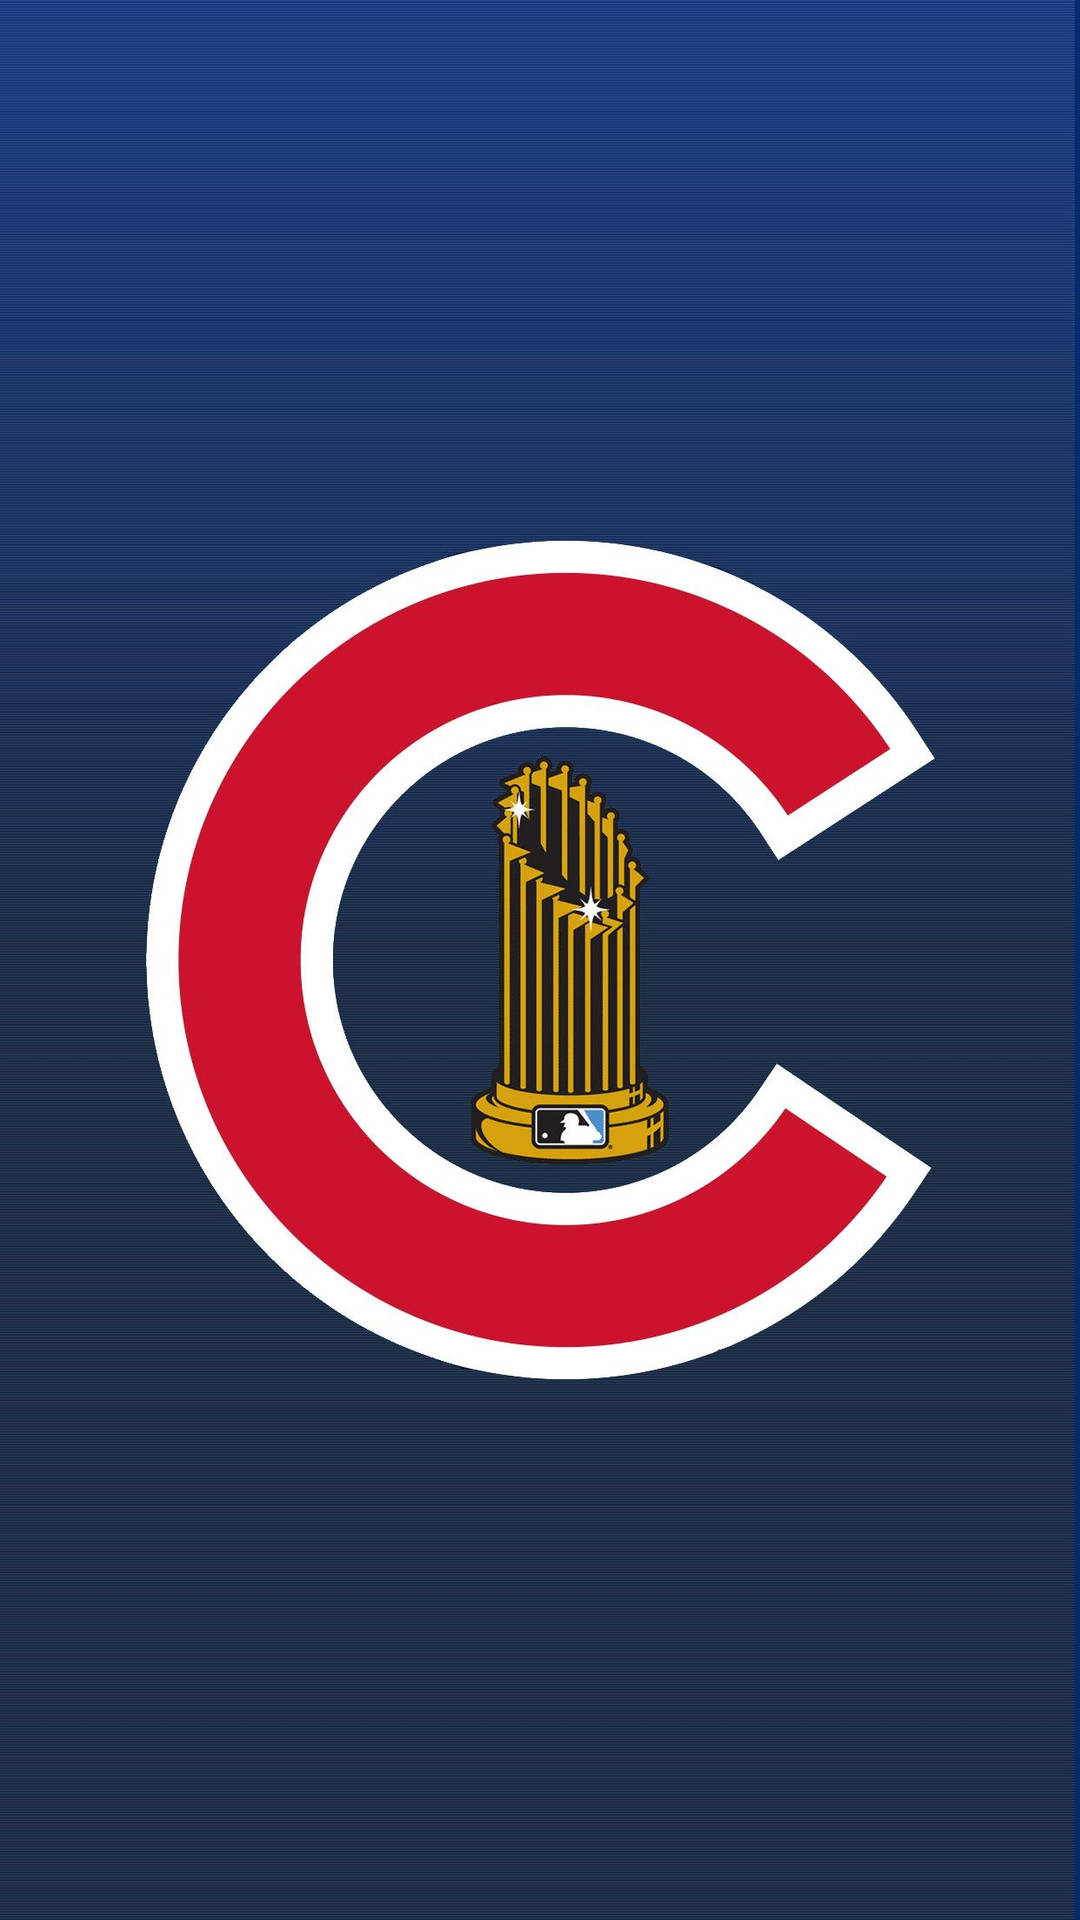 Chicago Cubs Win Poster Background